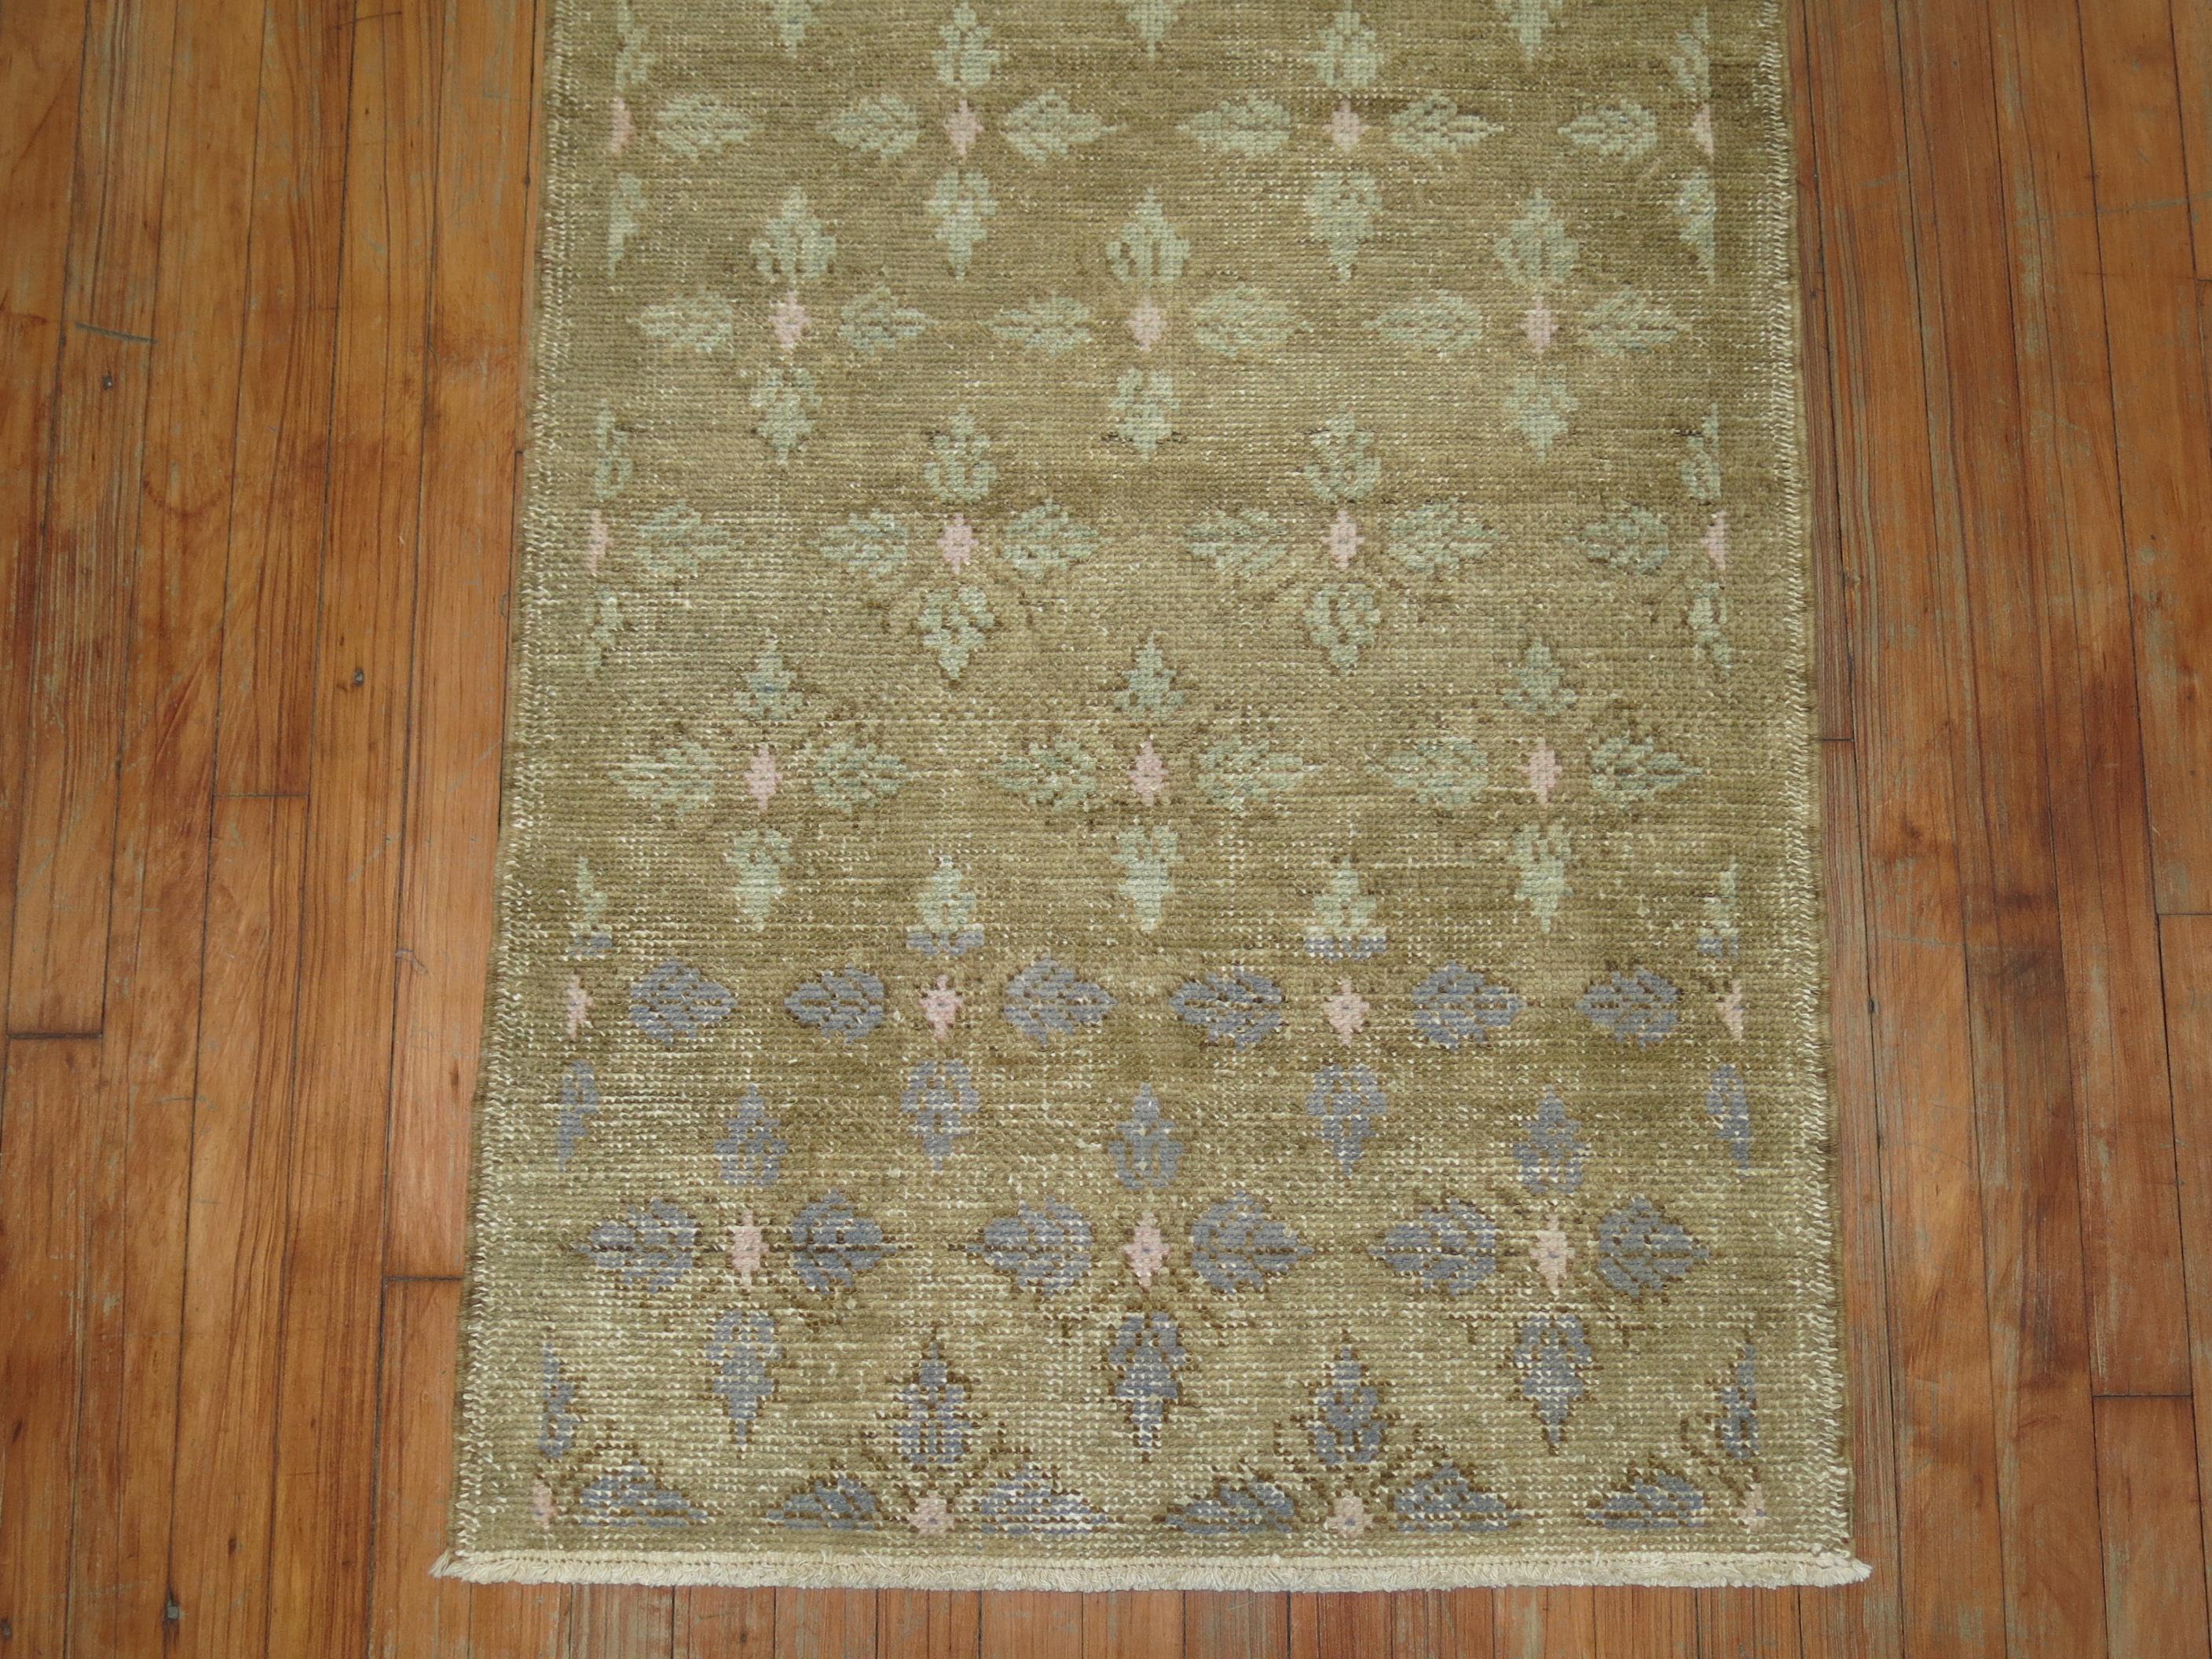 A mid-20th century tribal Turkish scatter size rug with pink, periwinkle, light green accents on a muddy brown ground

Measures: 2'7